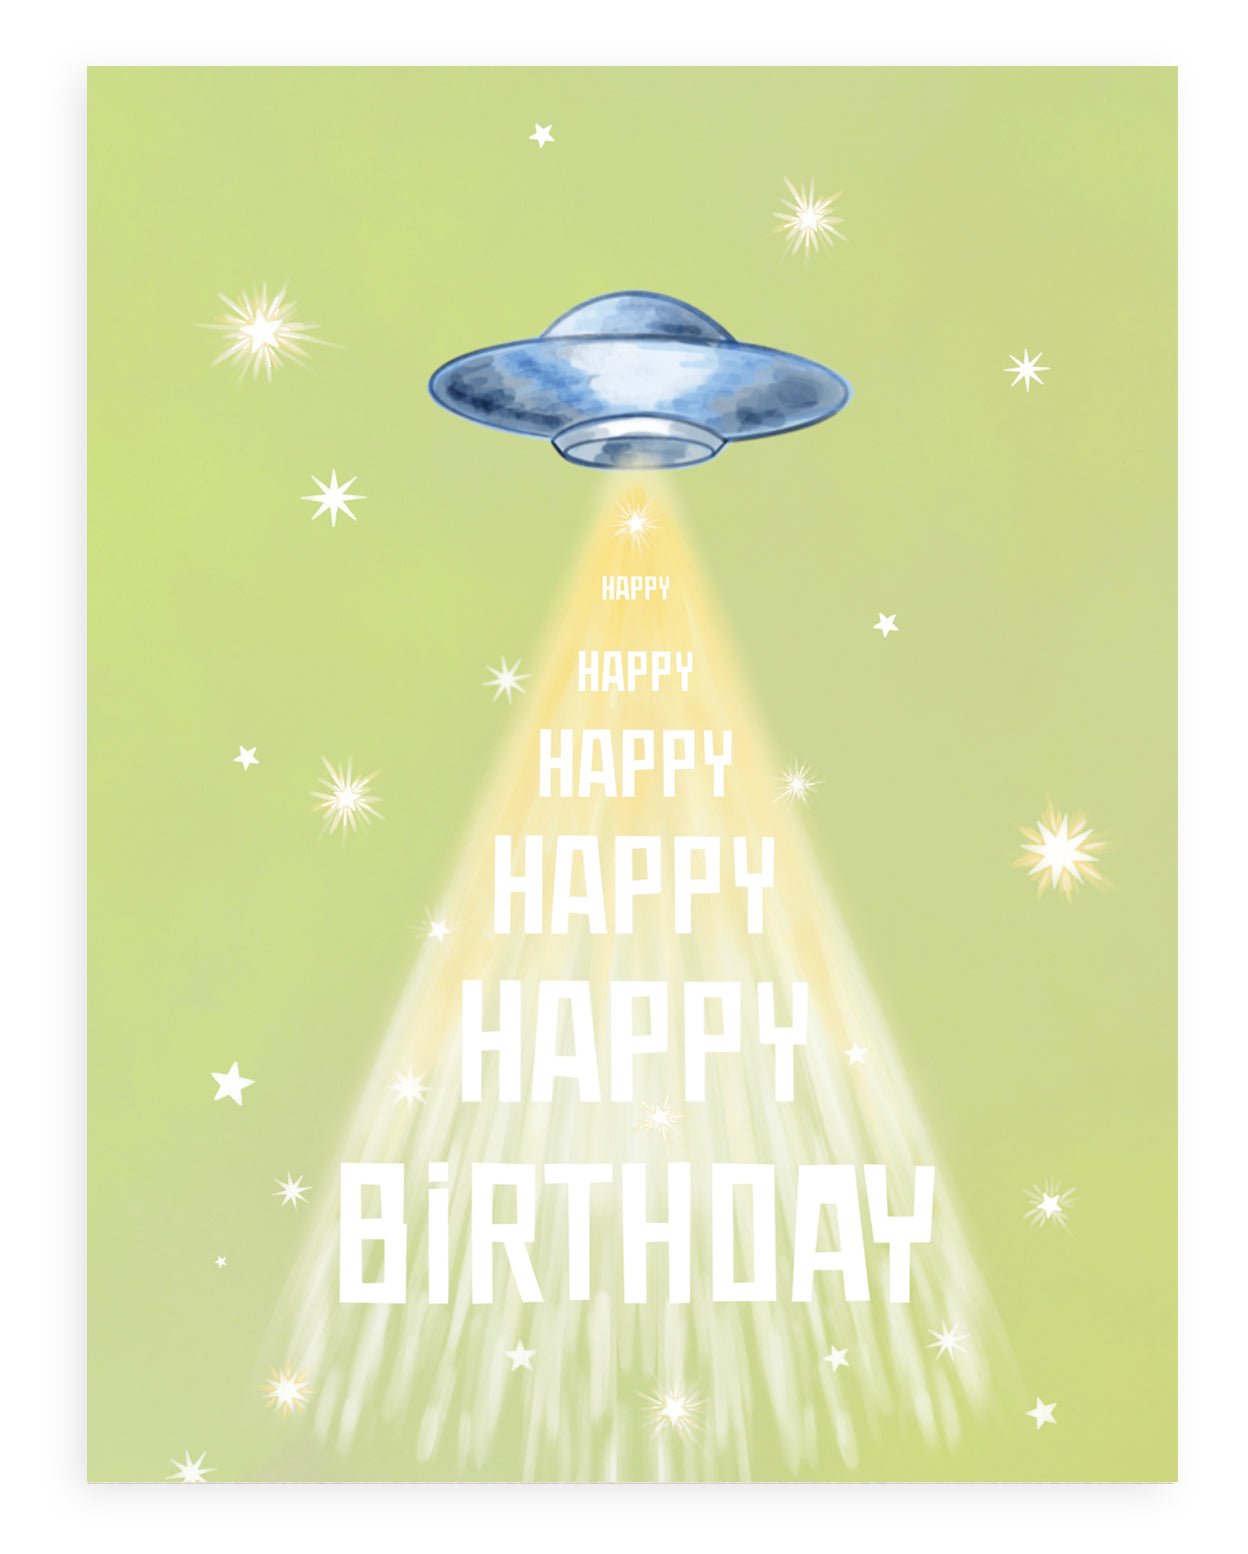 Greeting card with green background featuring stars and flying saucer with "happy birthday" printed down the front. Shown on white background.